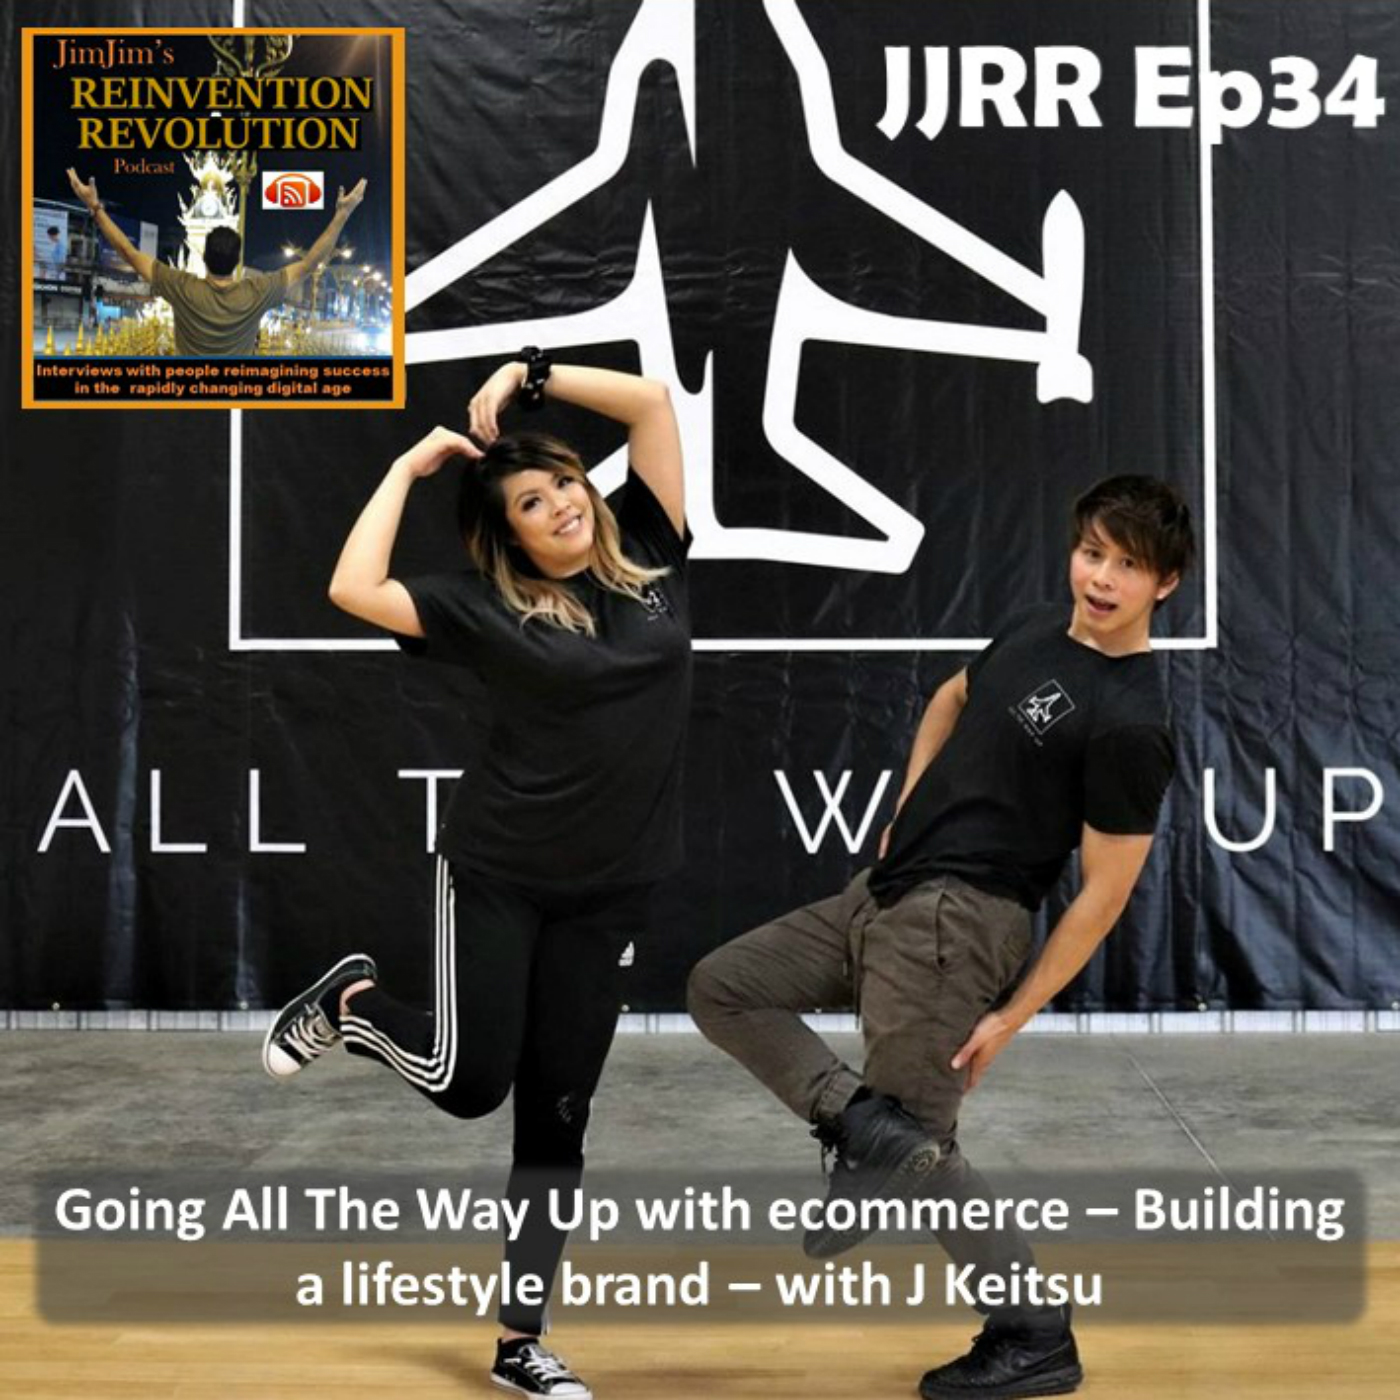 Read more about the article JJRR Ep34 Going All The Way Up with ecommerce – Building a lifestyle brand – with J Keitsu